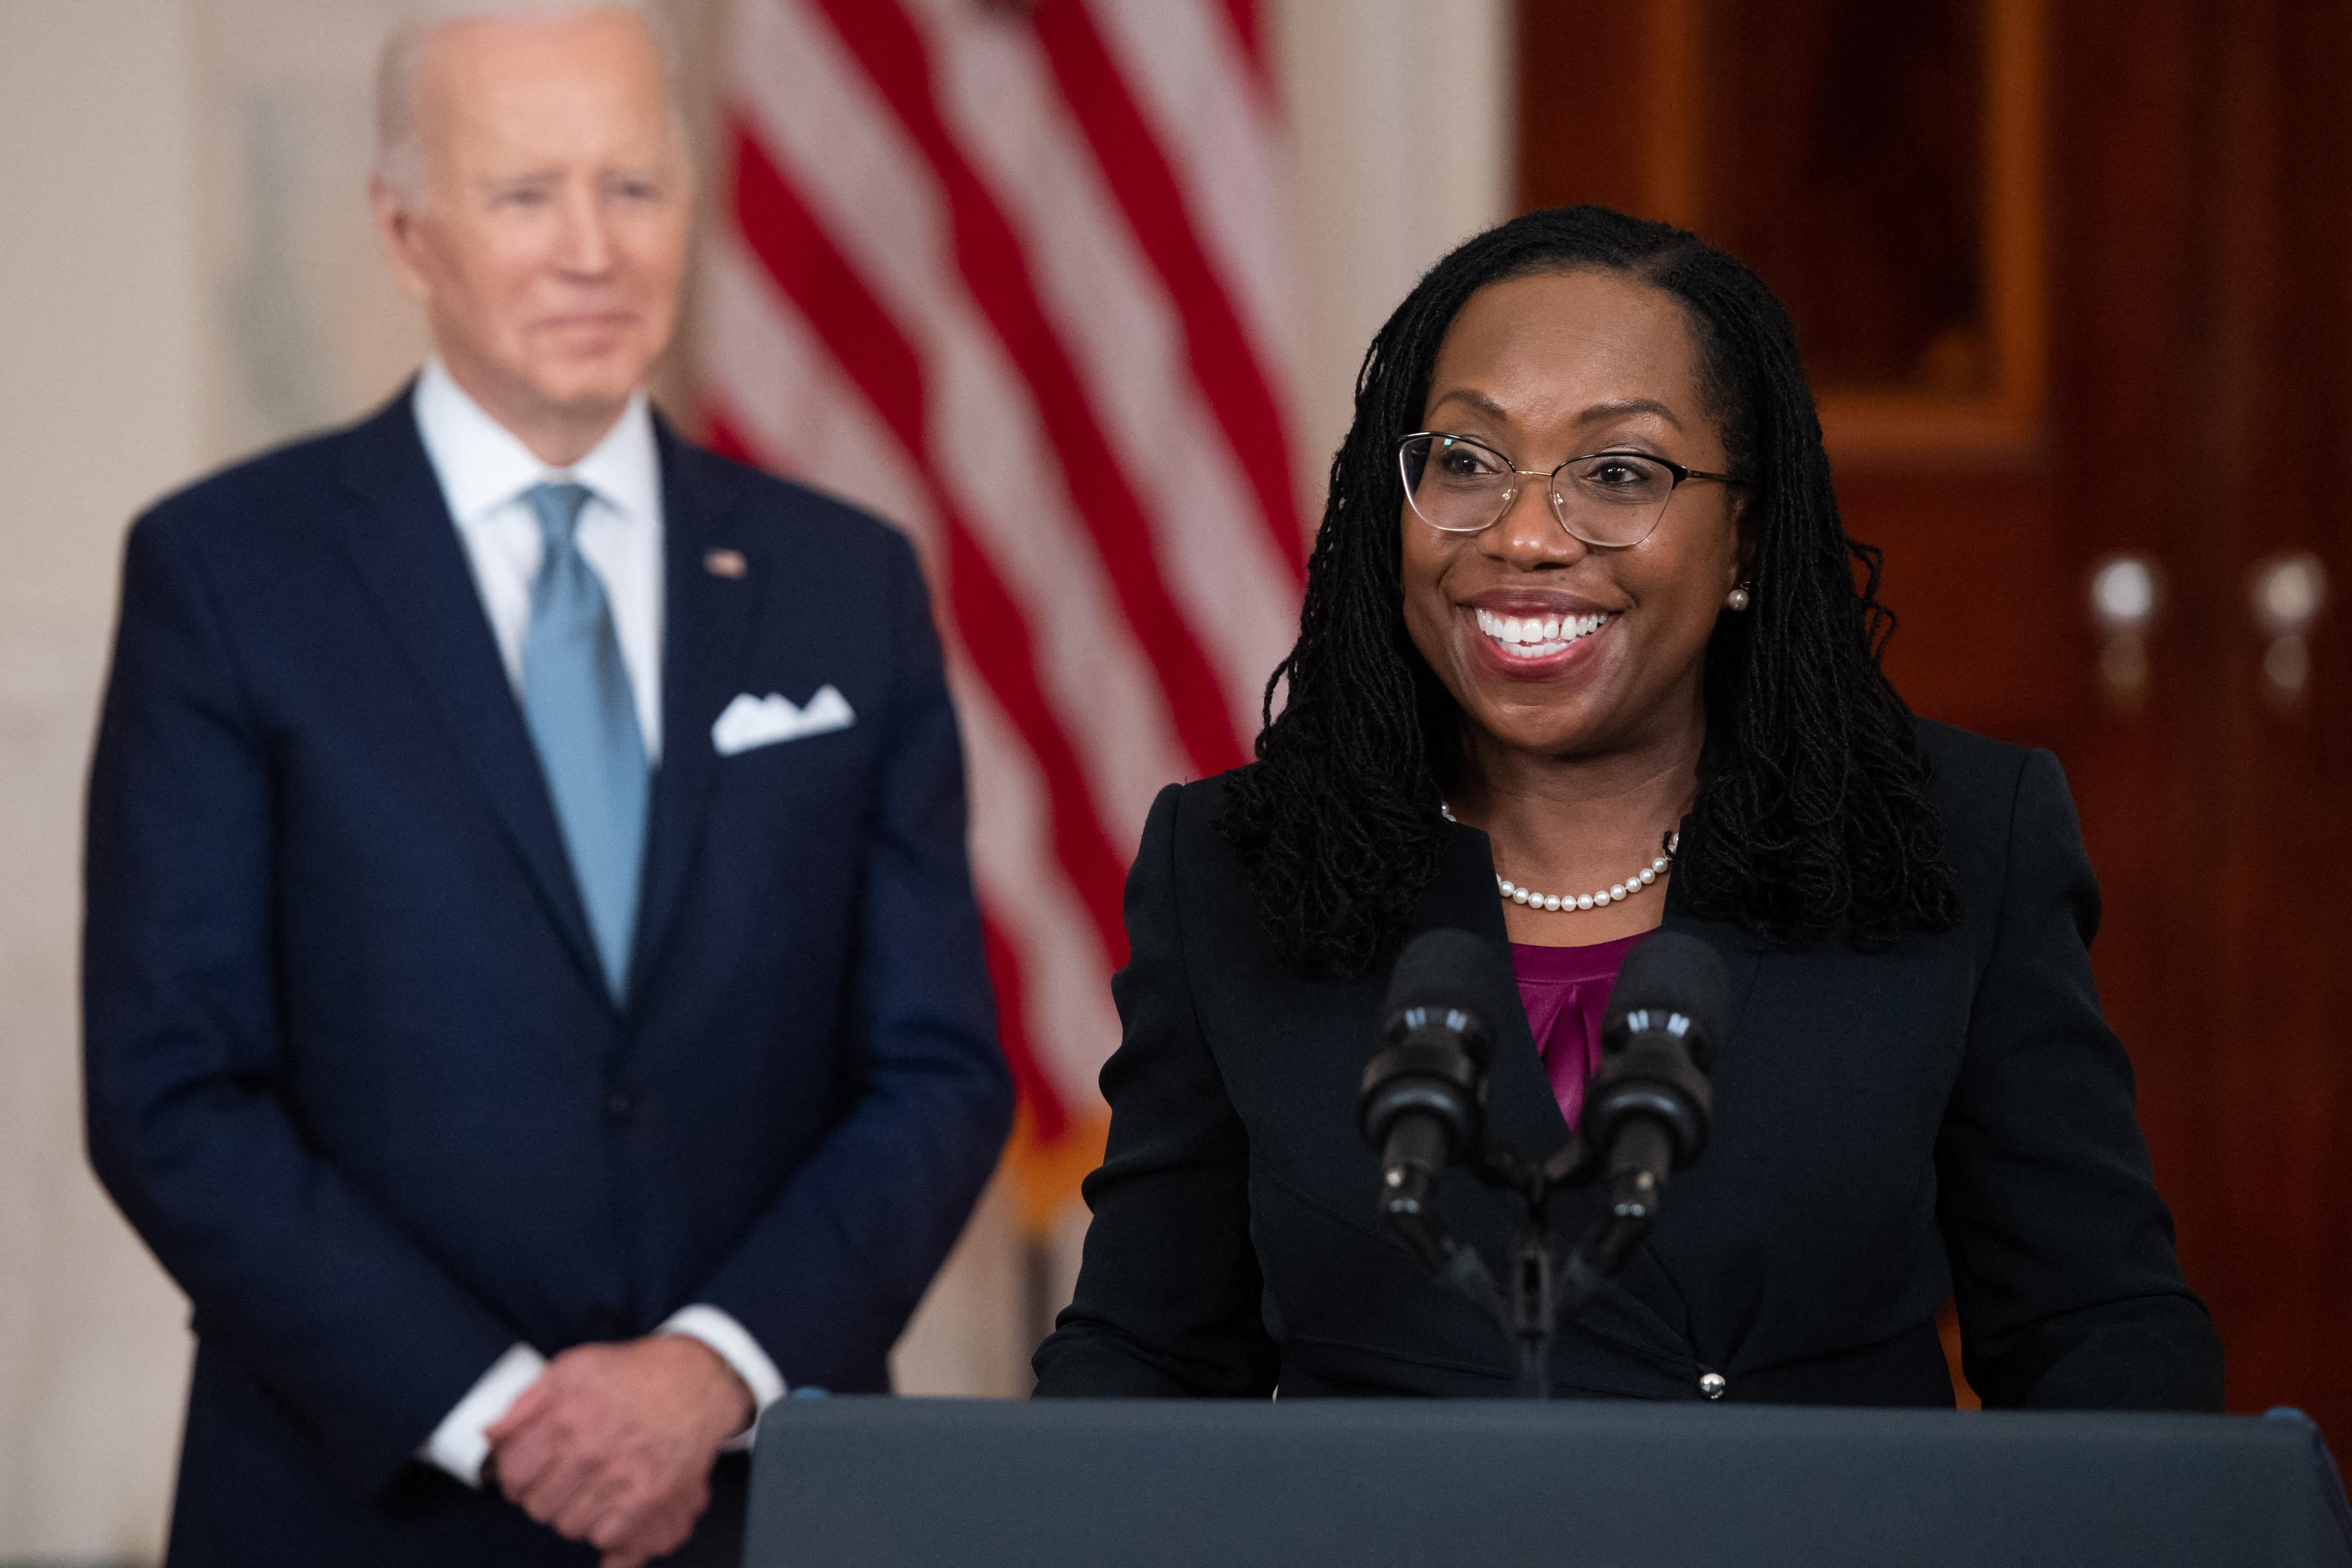 Jackson smiles broadly as she stands at a lectern with Biden smiling behind her